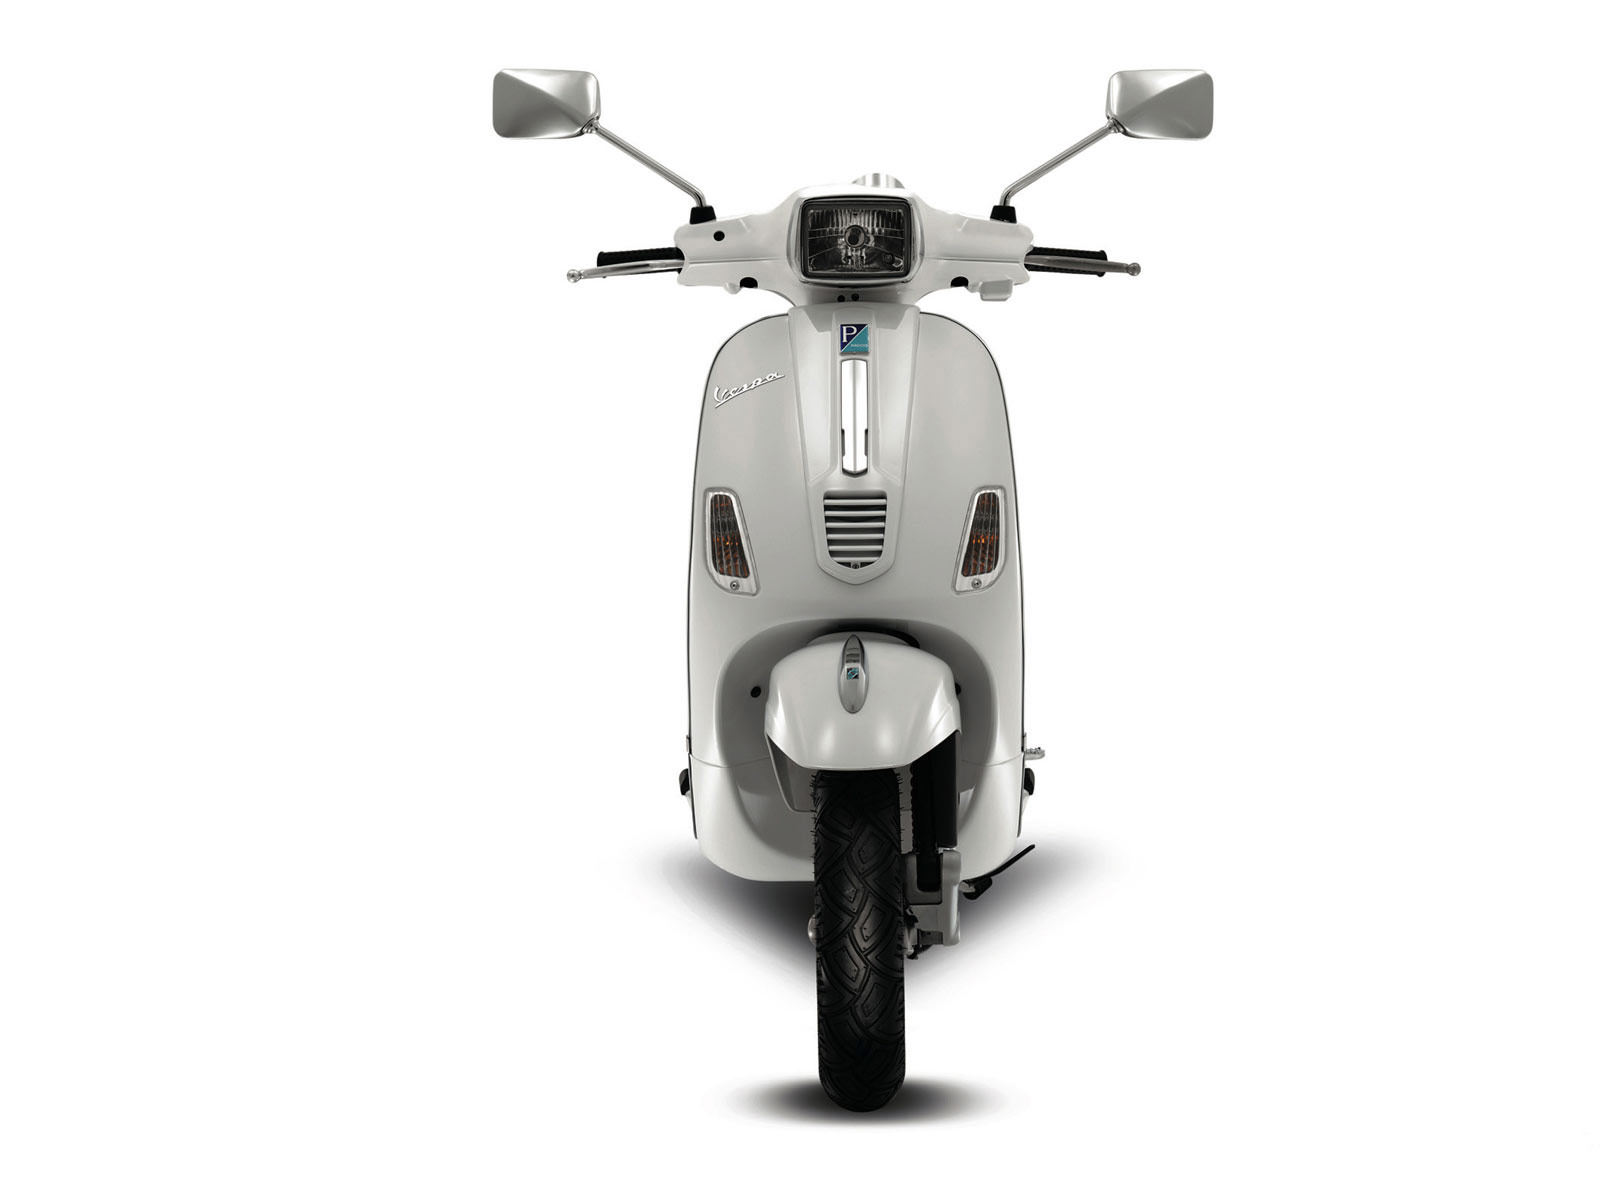 Vespa S 125, equipped with a modern and ecological engine, designed to cover